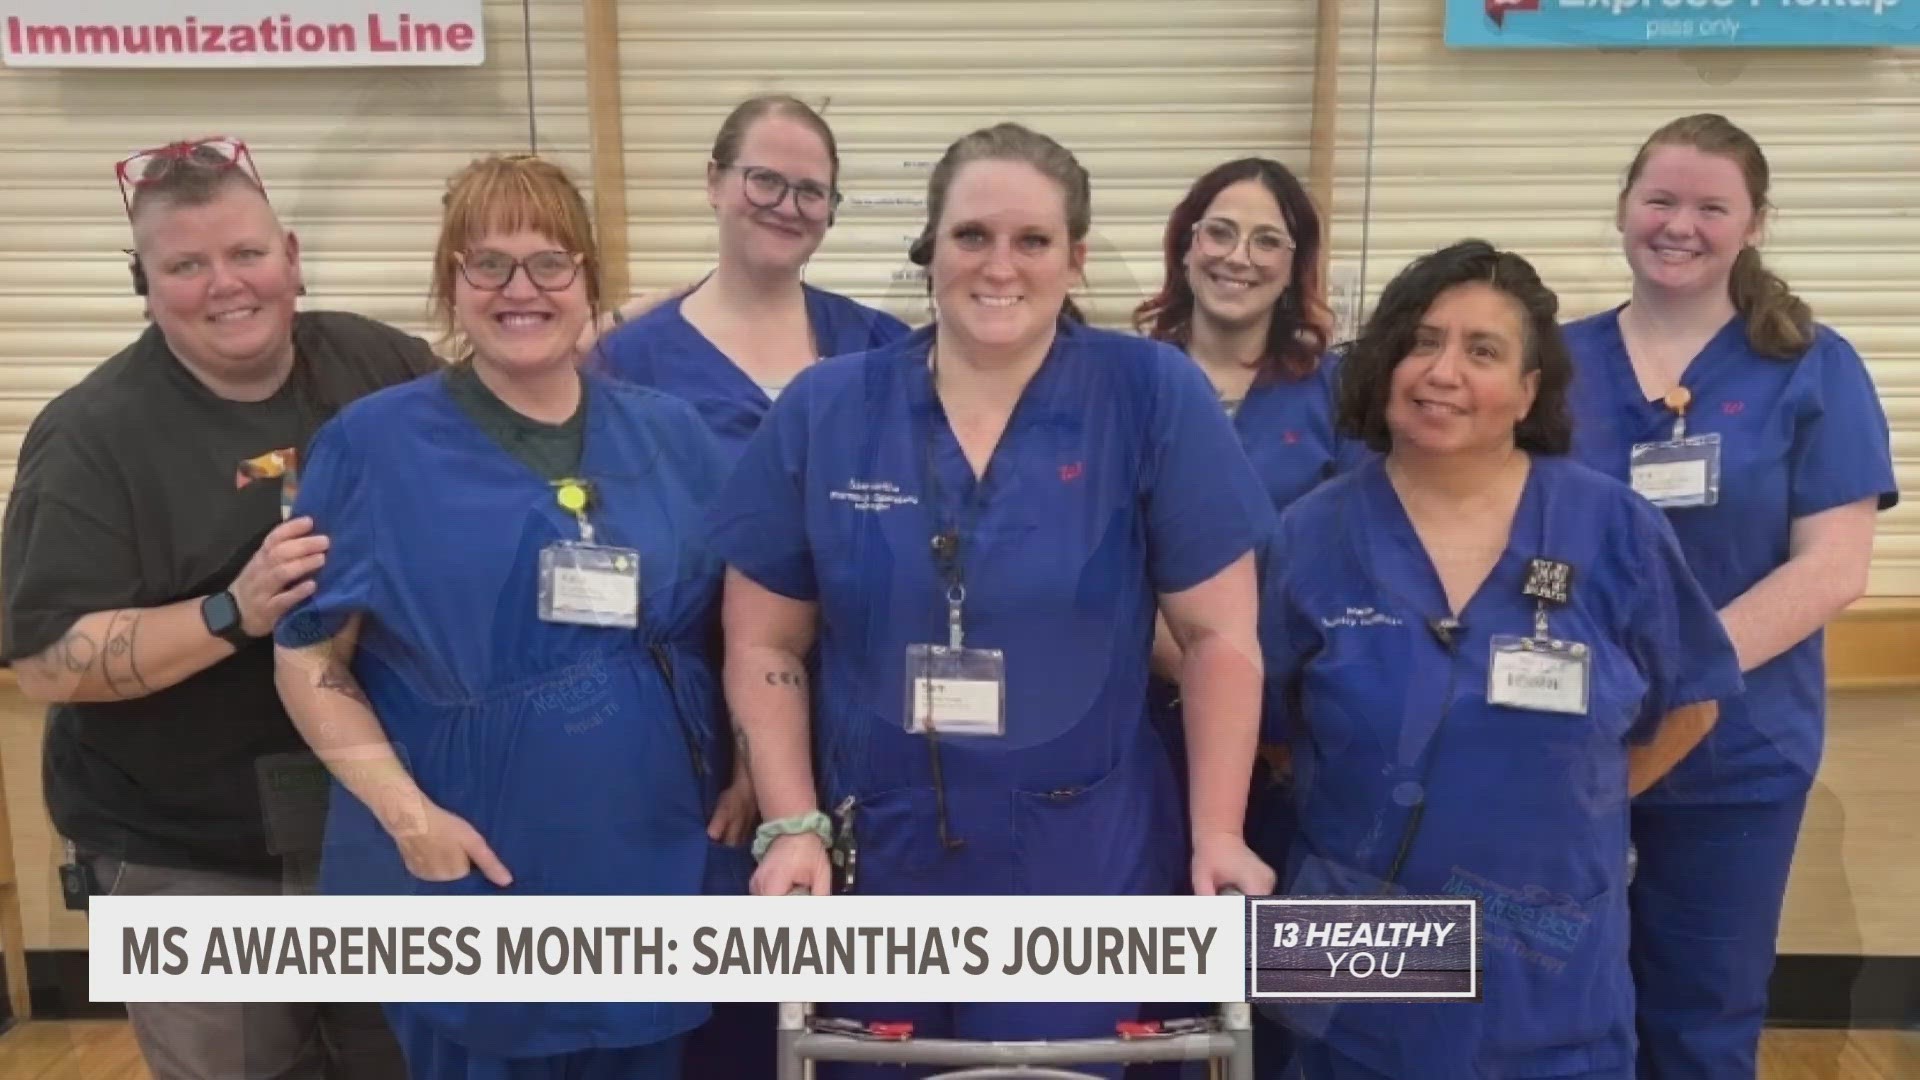 Samantha Pastucha wowed her physical therapists, relearning to walk after an MS diagnoses at just 26 years old.